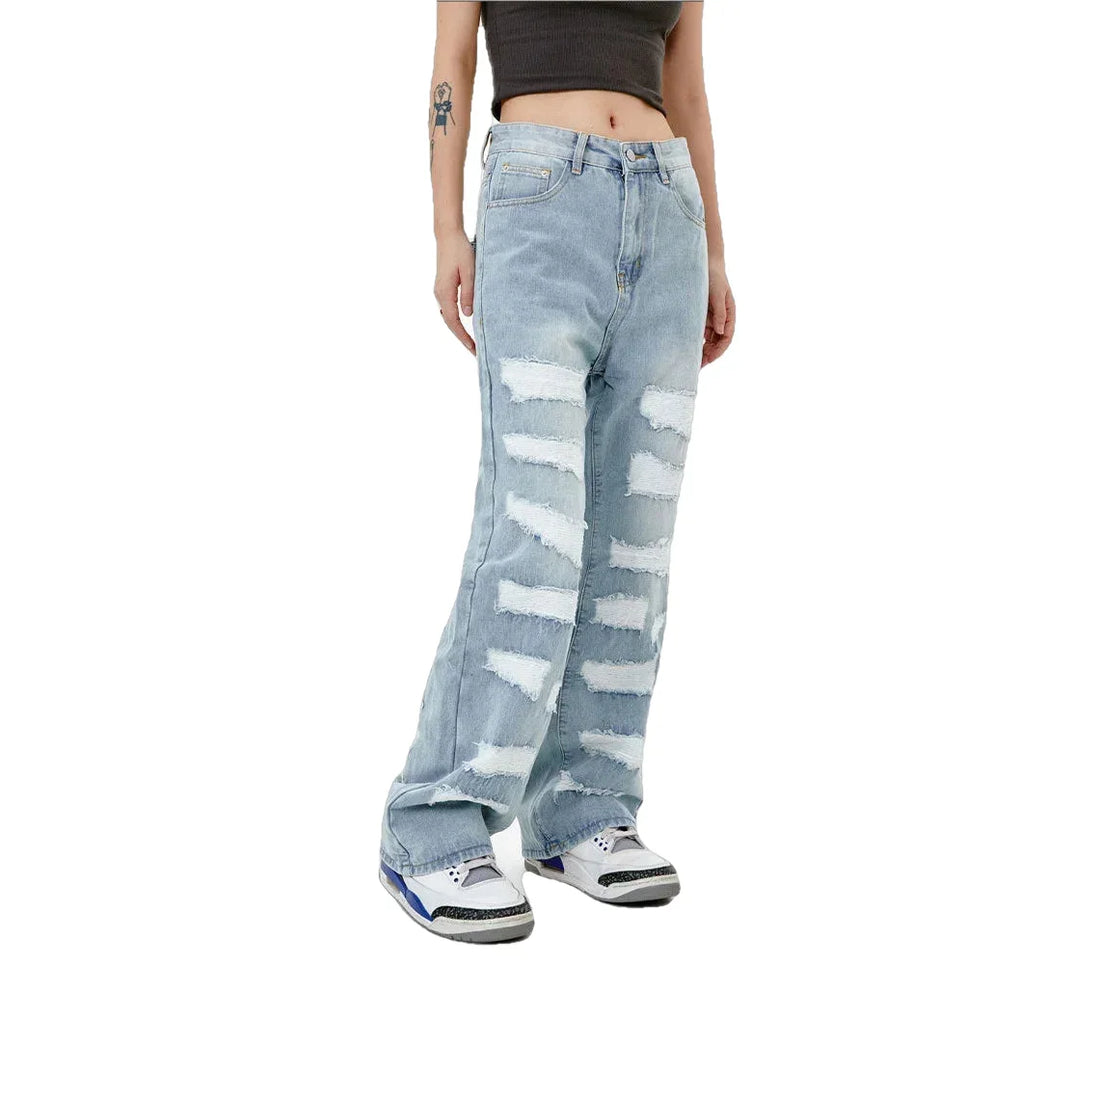 Streetwear Unisex Made Extreme Ripped Jeans